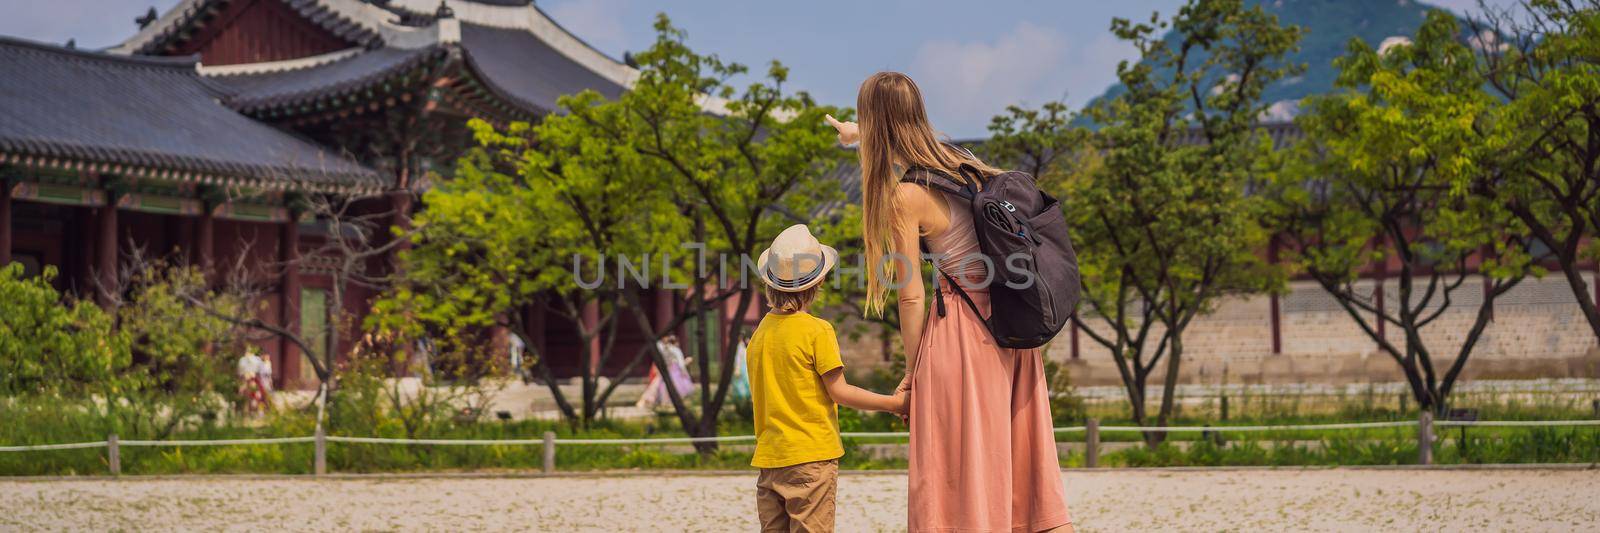 Mom and son tourists in Seoul, South Korea. Travel to Korea concept. Traveling with children concept BANNER, LONG FORMAT by galitskaya